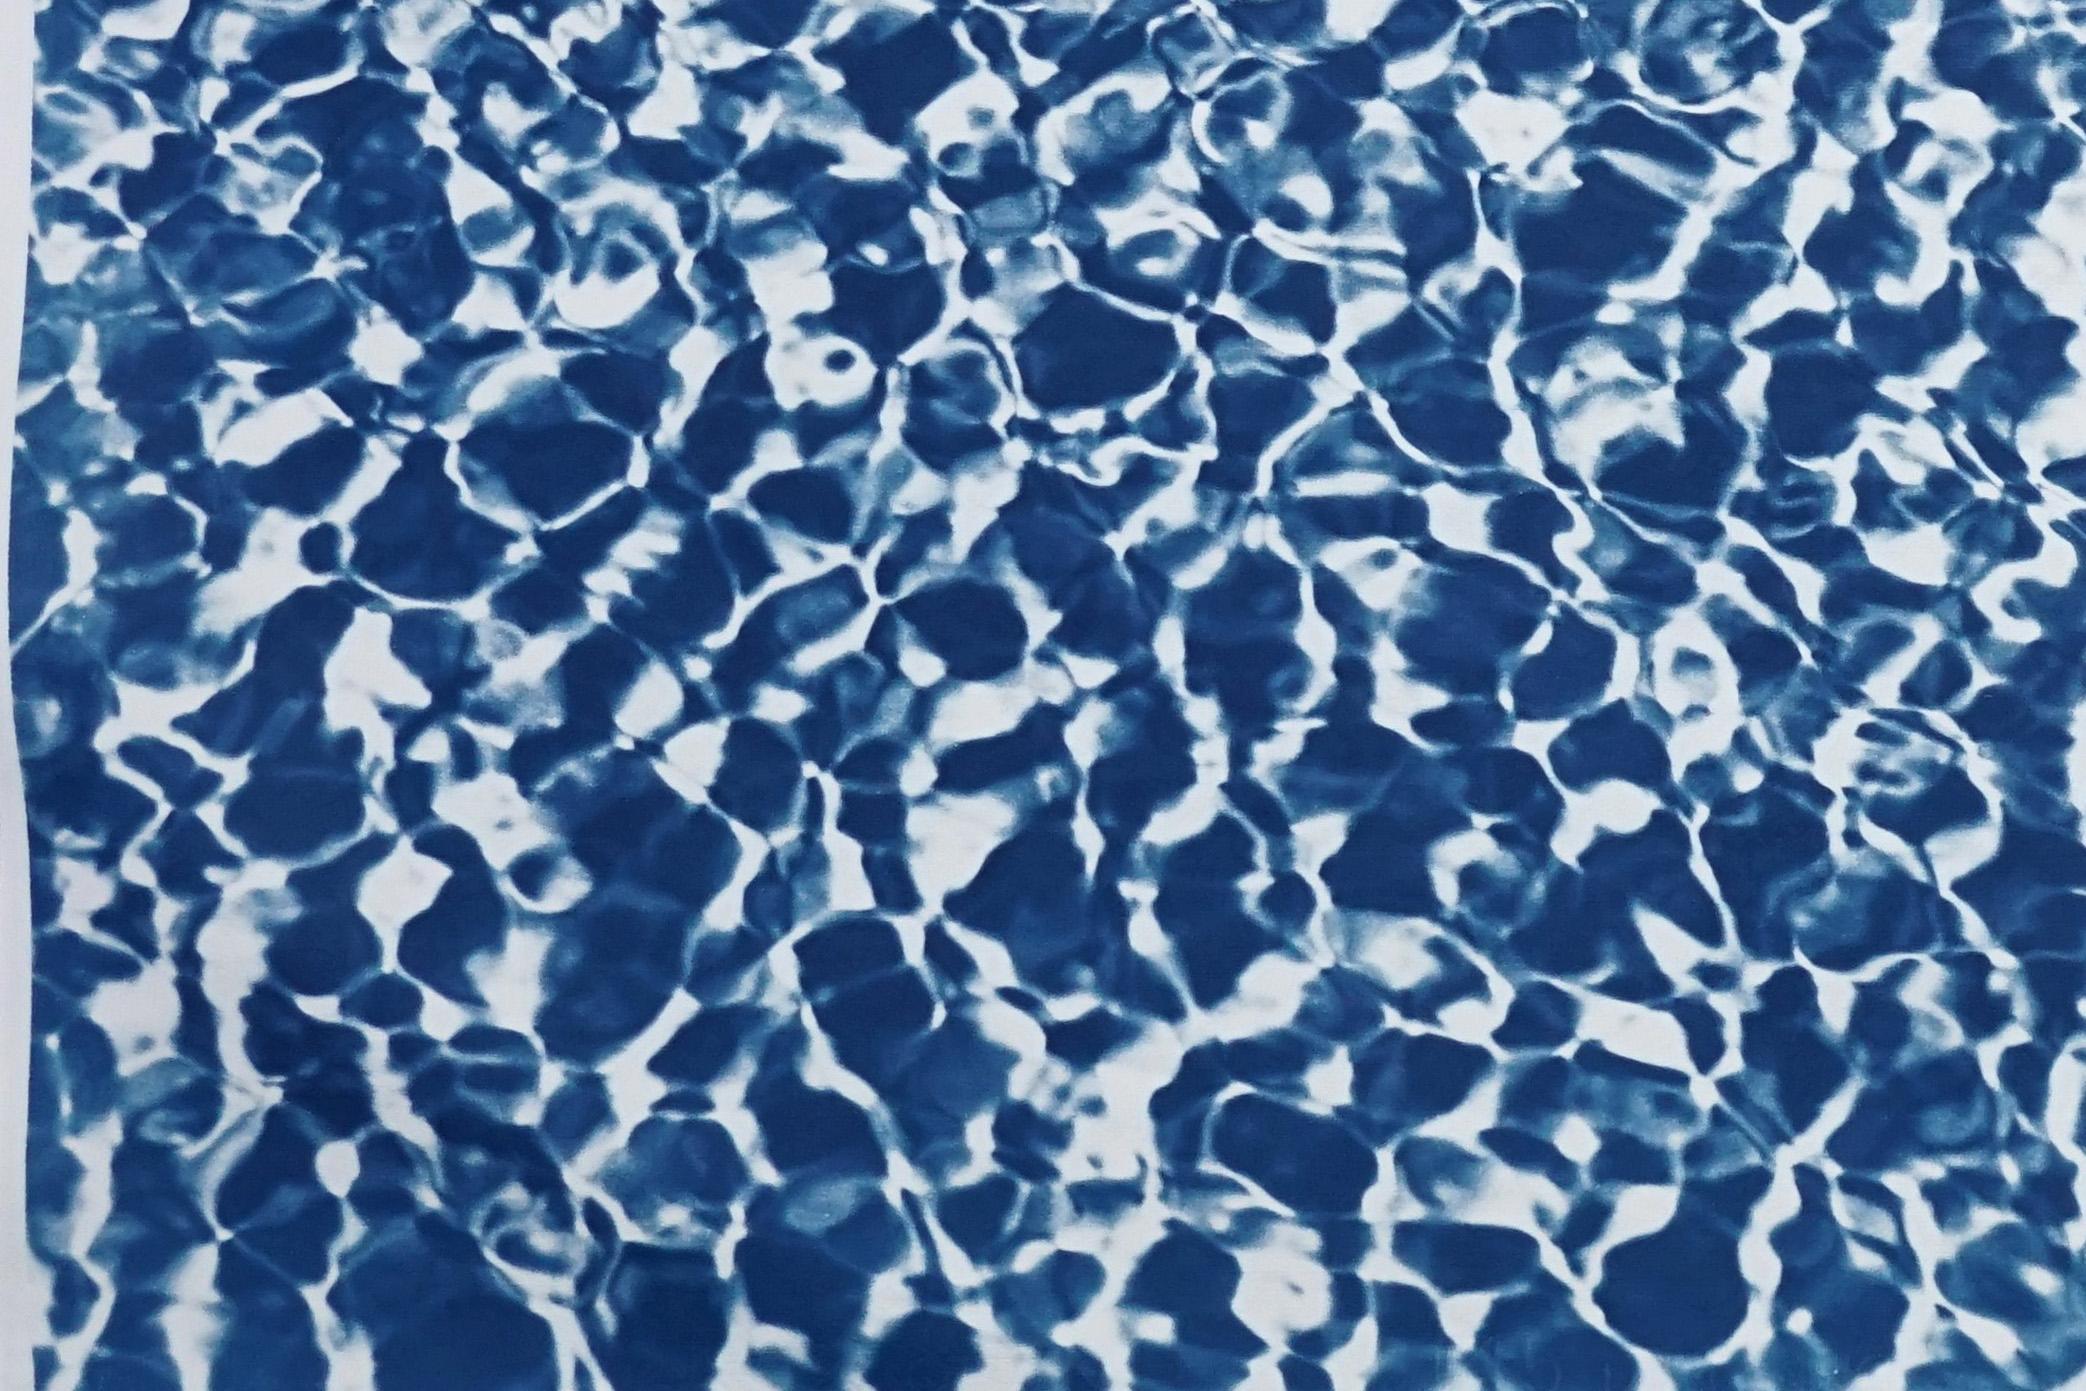 Infinity Pool Water Reflections, Blue & White Pattern, Handmade Cyanotype Print For Sale 1